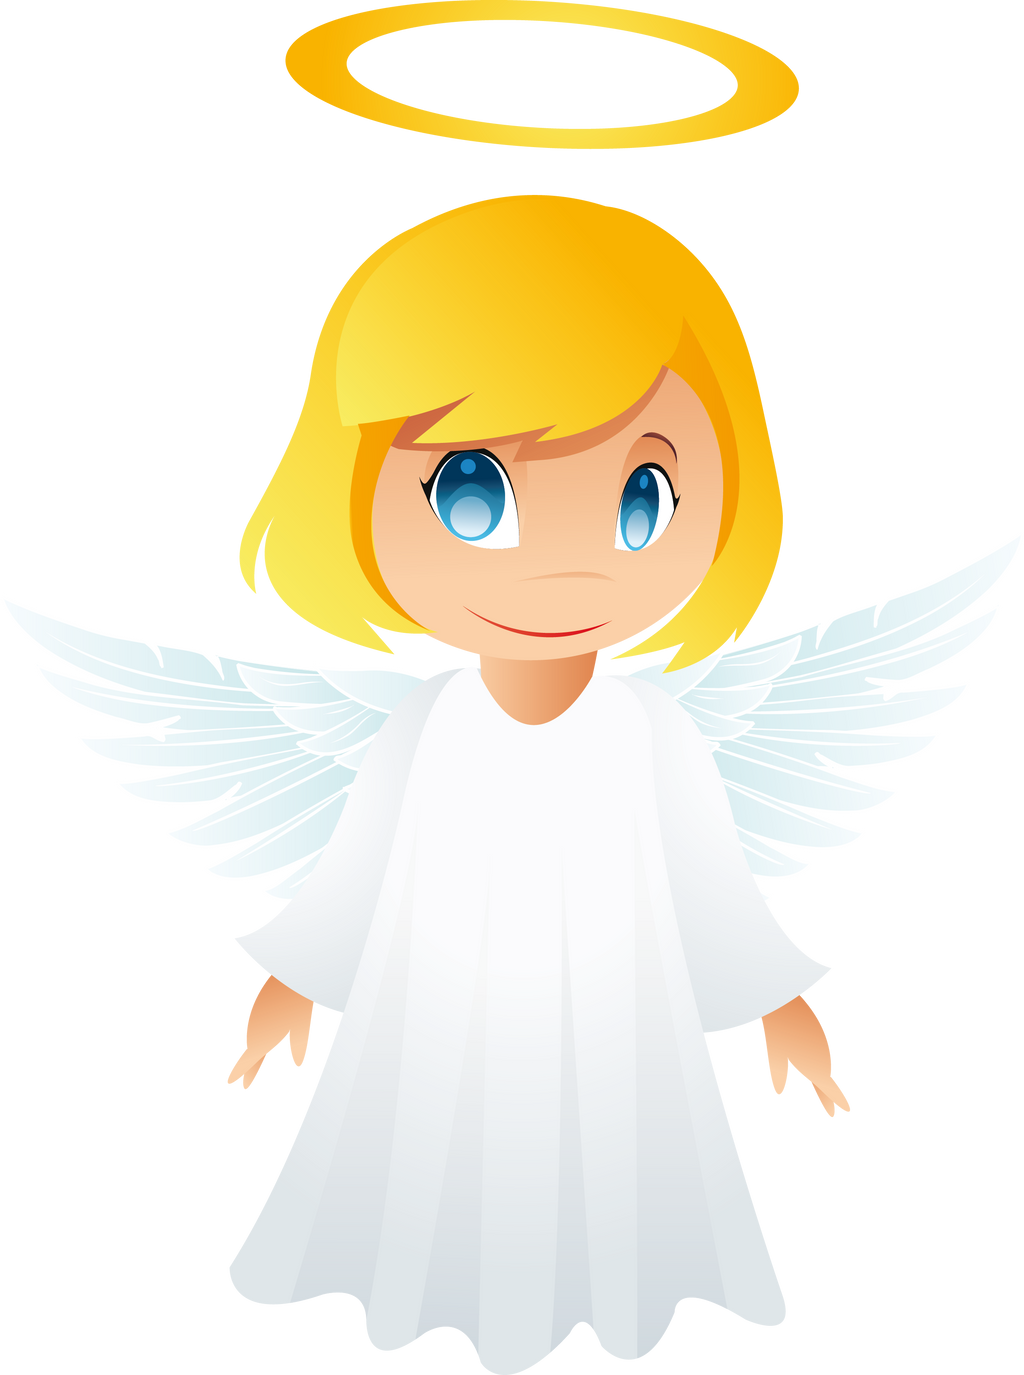 Cute Angel Free PNG Clipart Picture by joeatta78 on DeviantArt